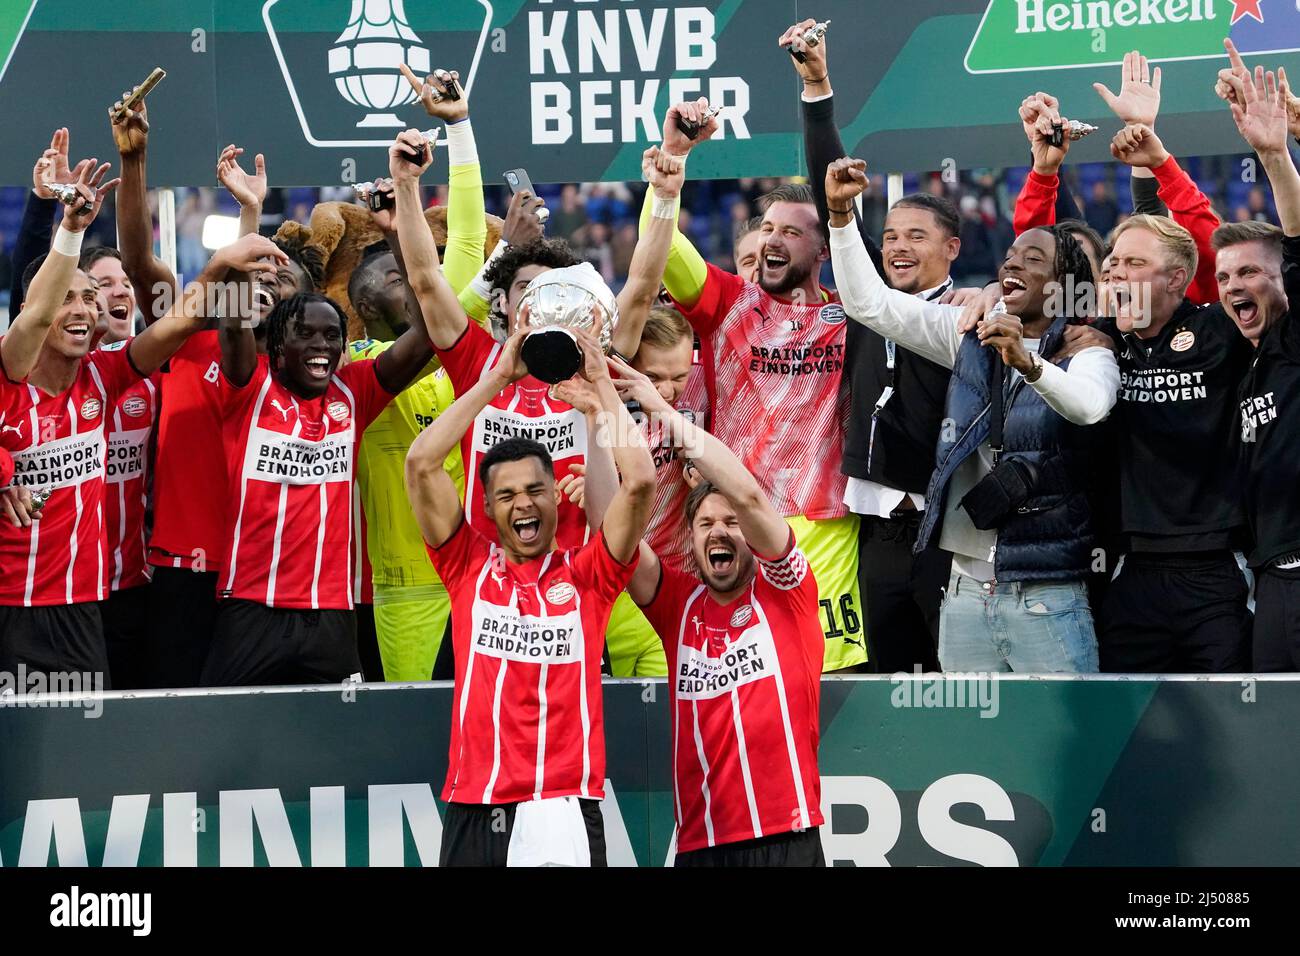 OptaJohan on X: 2 - PSV have won the KNVB Cup in consecutive seasons for  the first time since 1988-1990, when the Eindhoven side won the cup three  times in a row.